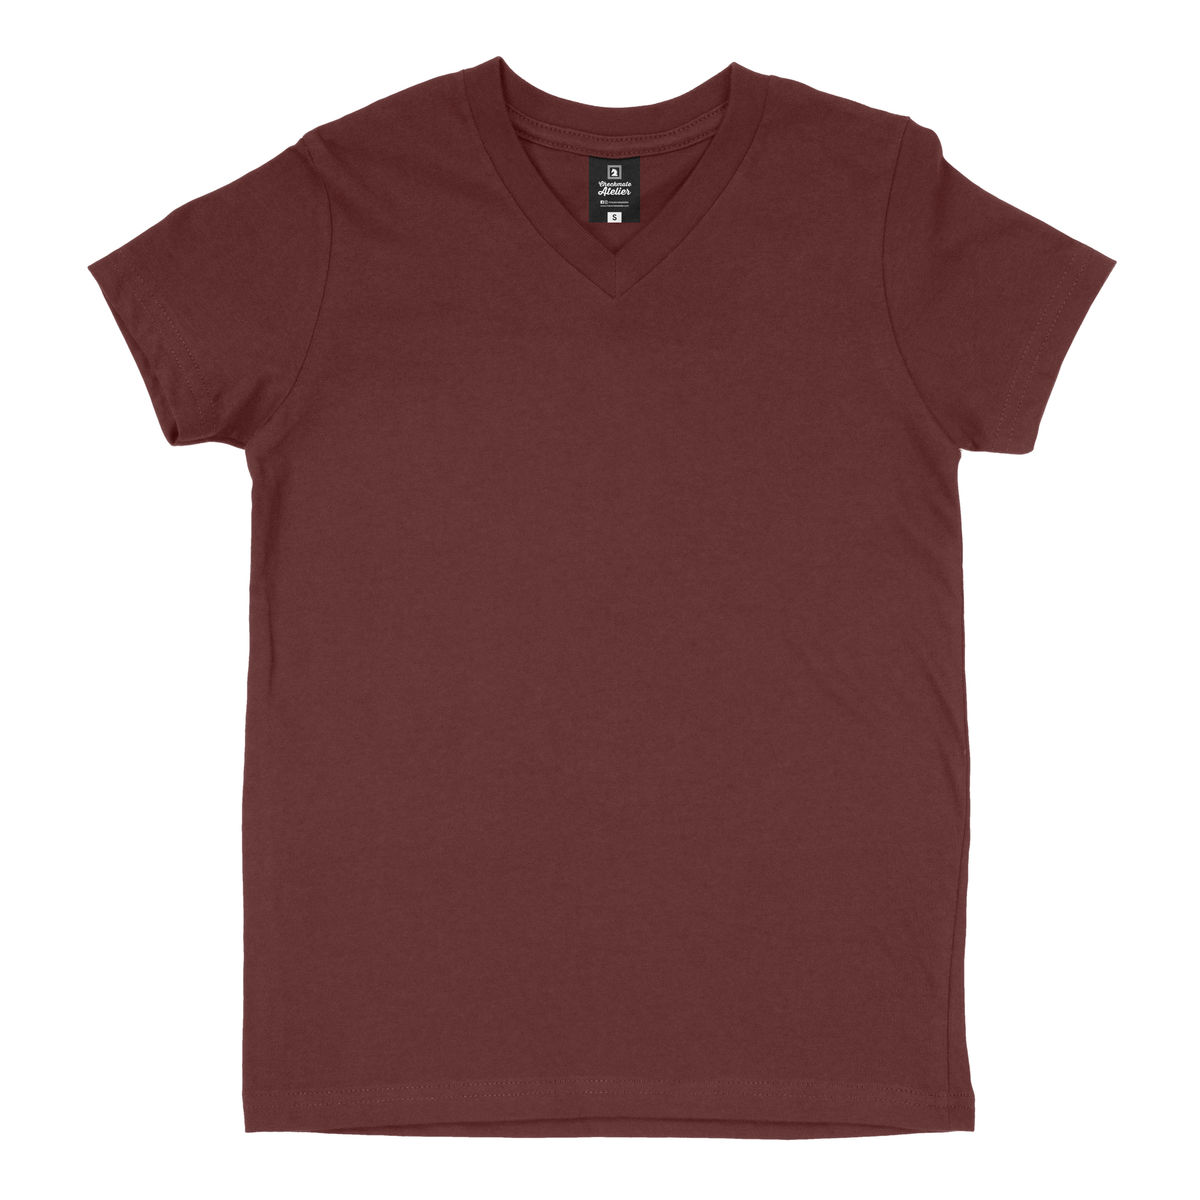 Maroon V-Neck T-Shirt - Checkmate Atelier - Official Online Store